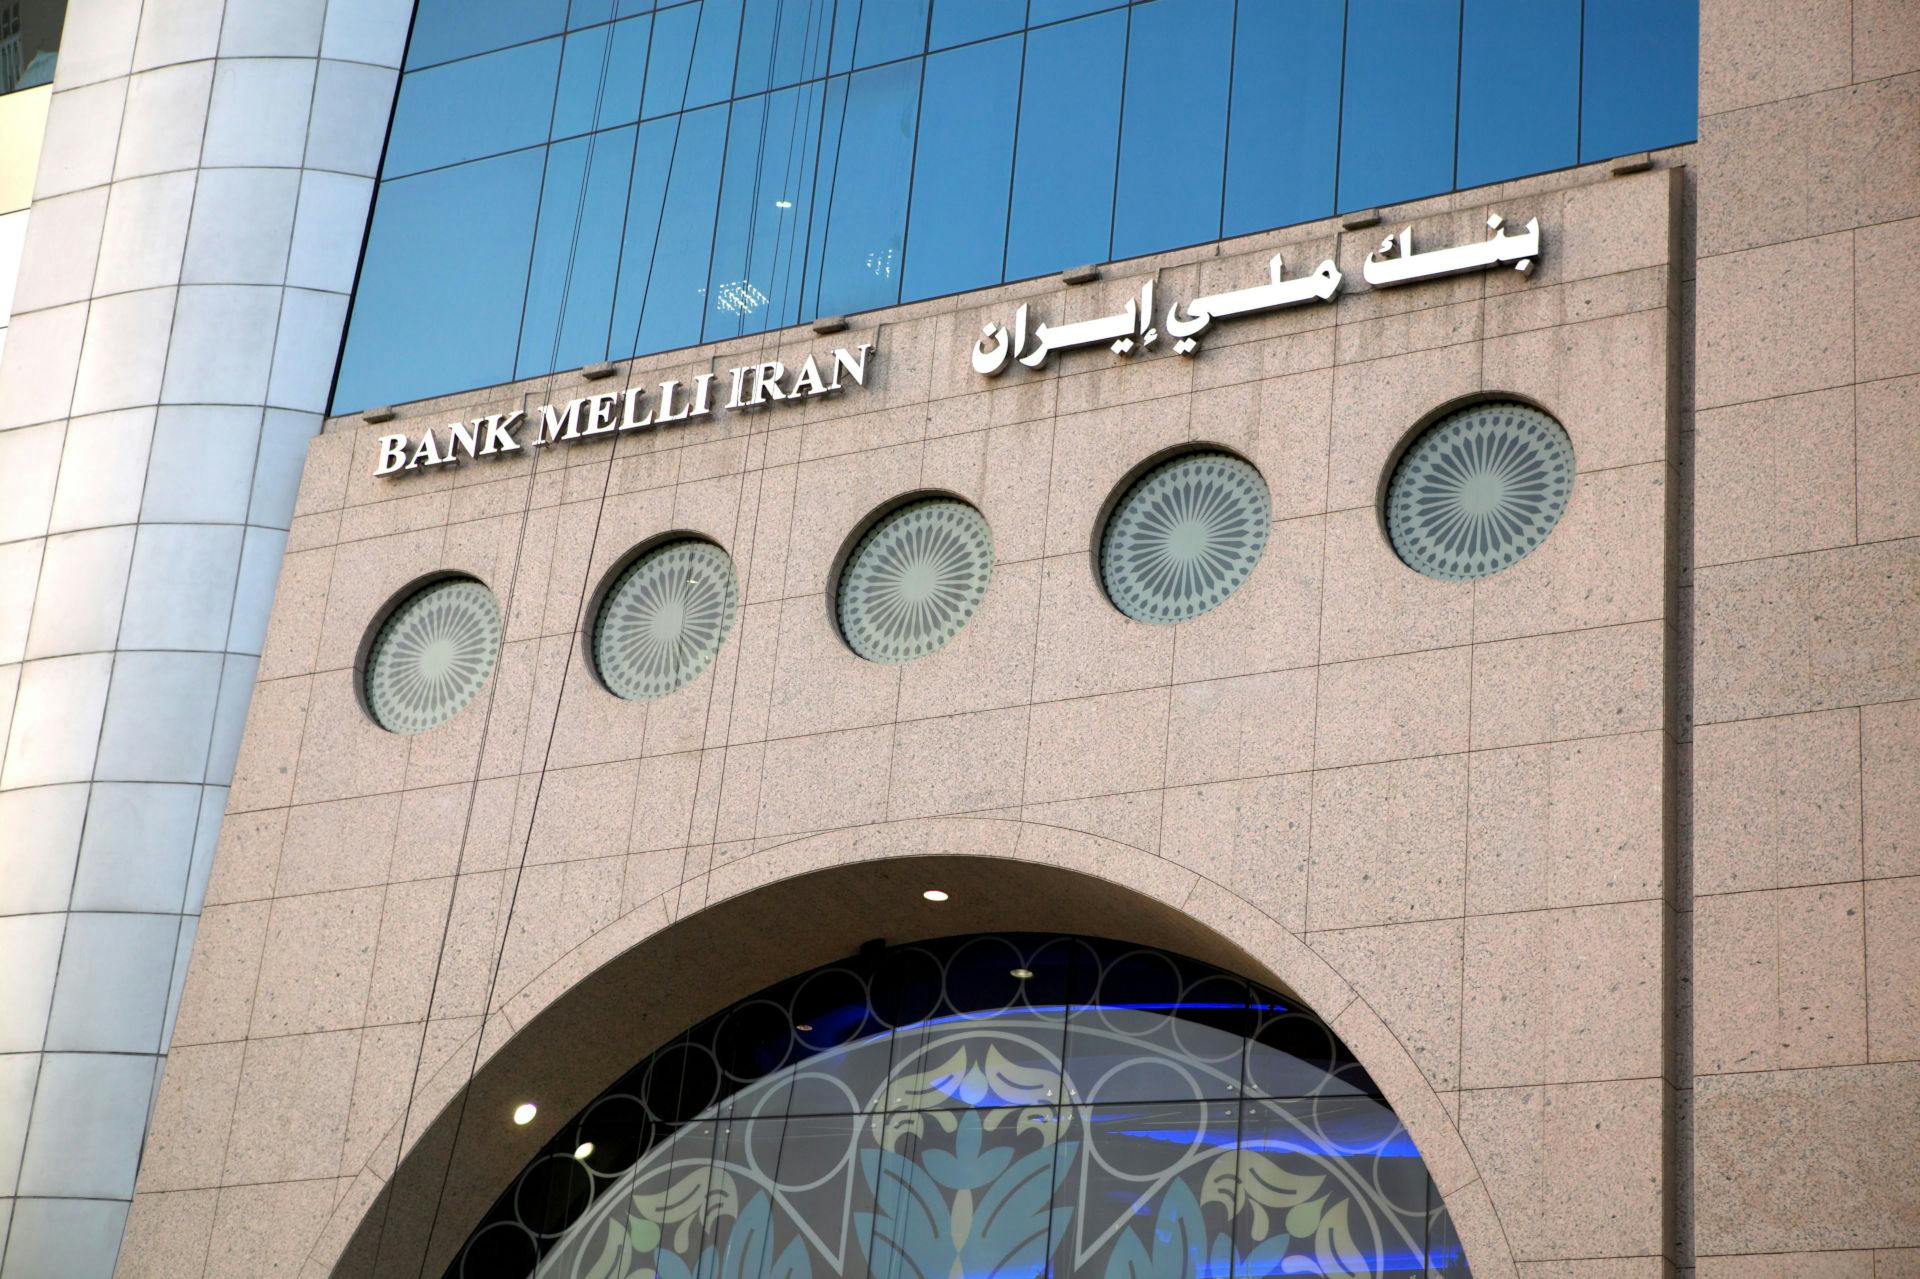 The outside of the Bank Melli Iran building features the name of the bank in Farsi letters on one side and in English for international audiences on the other above a soaring arch reminiscent of a Middle Eastern mosque.